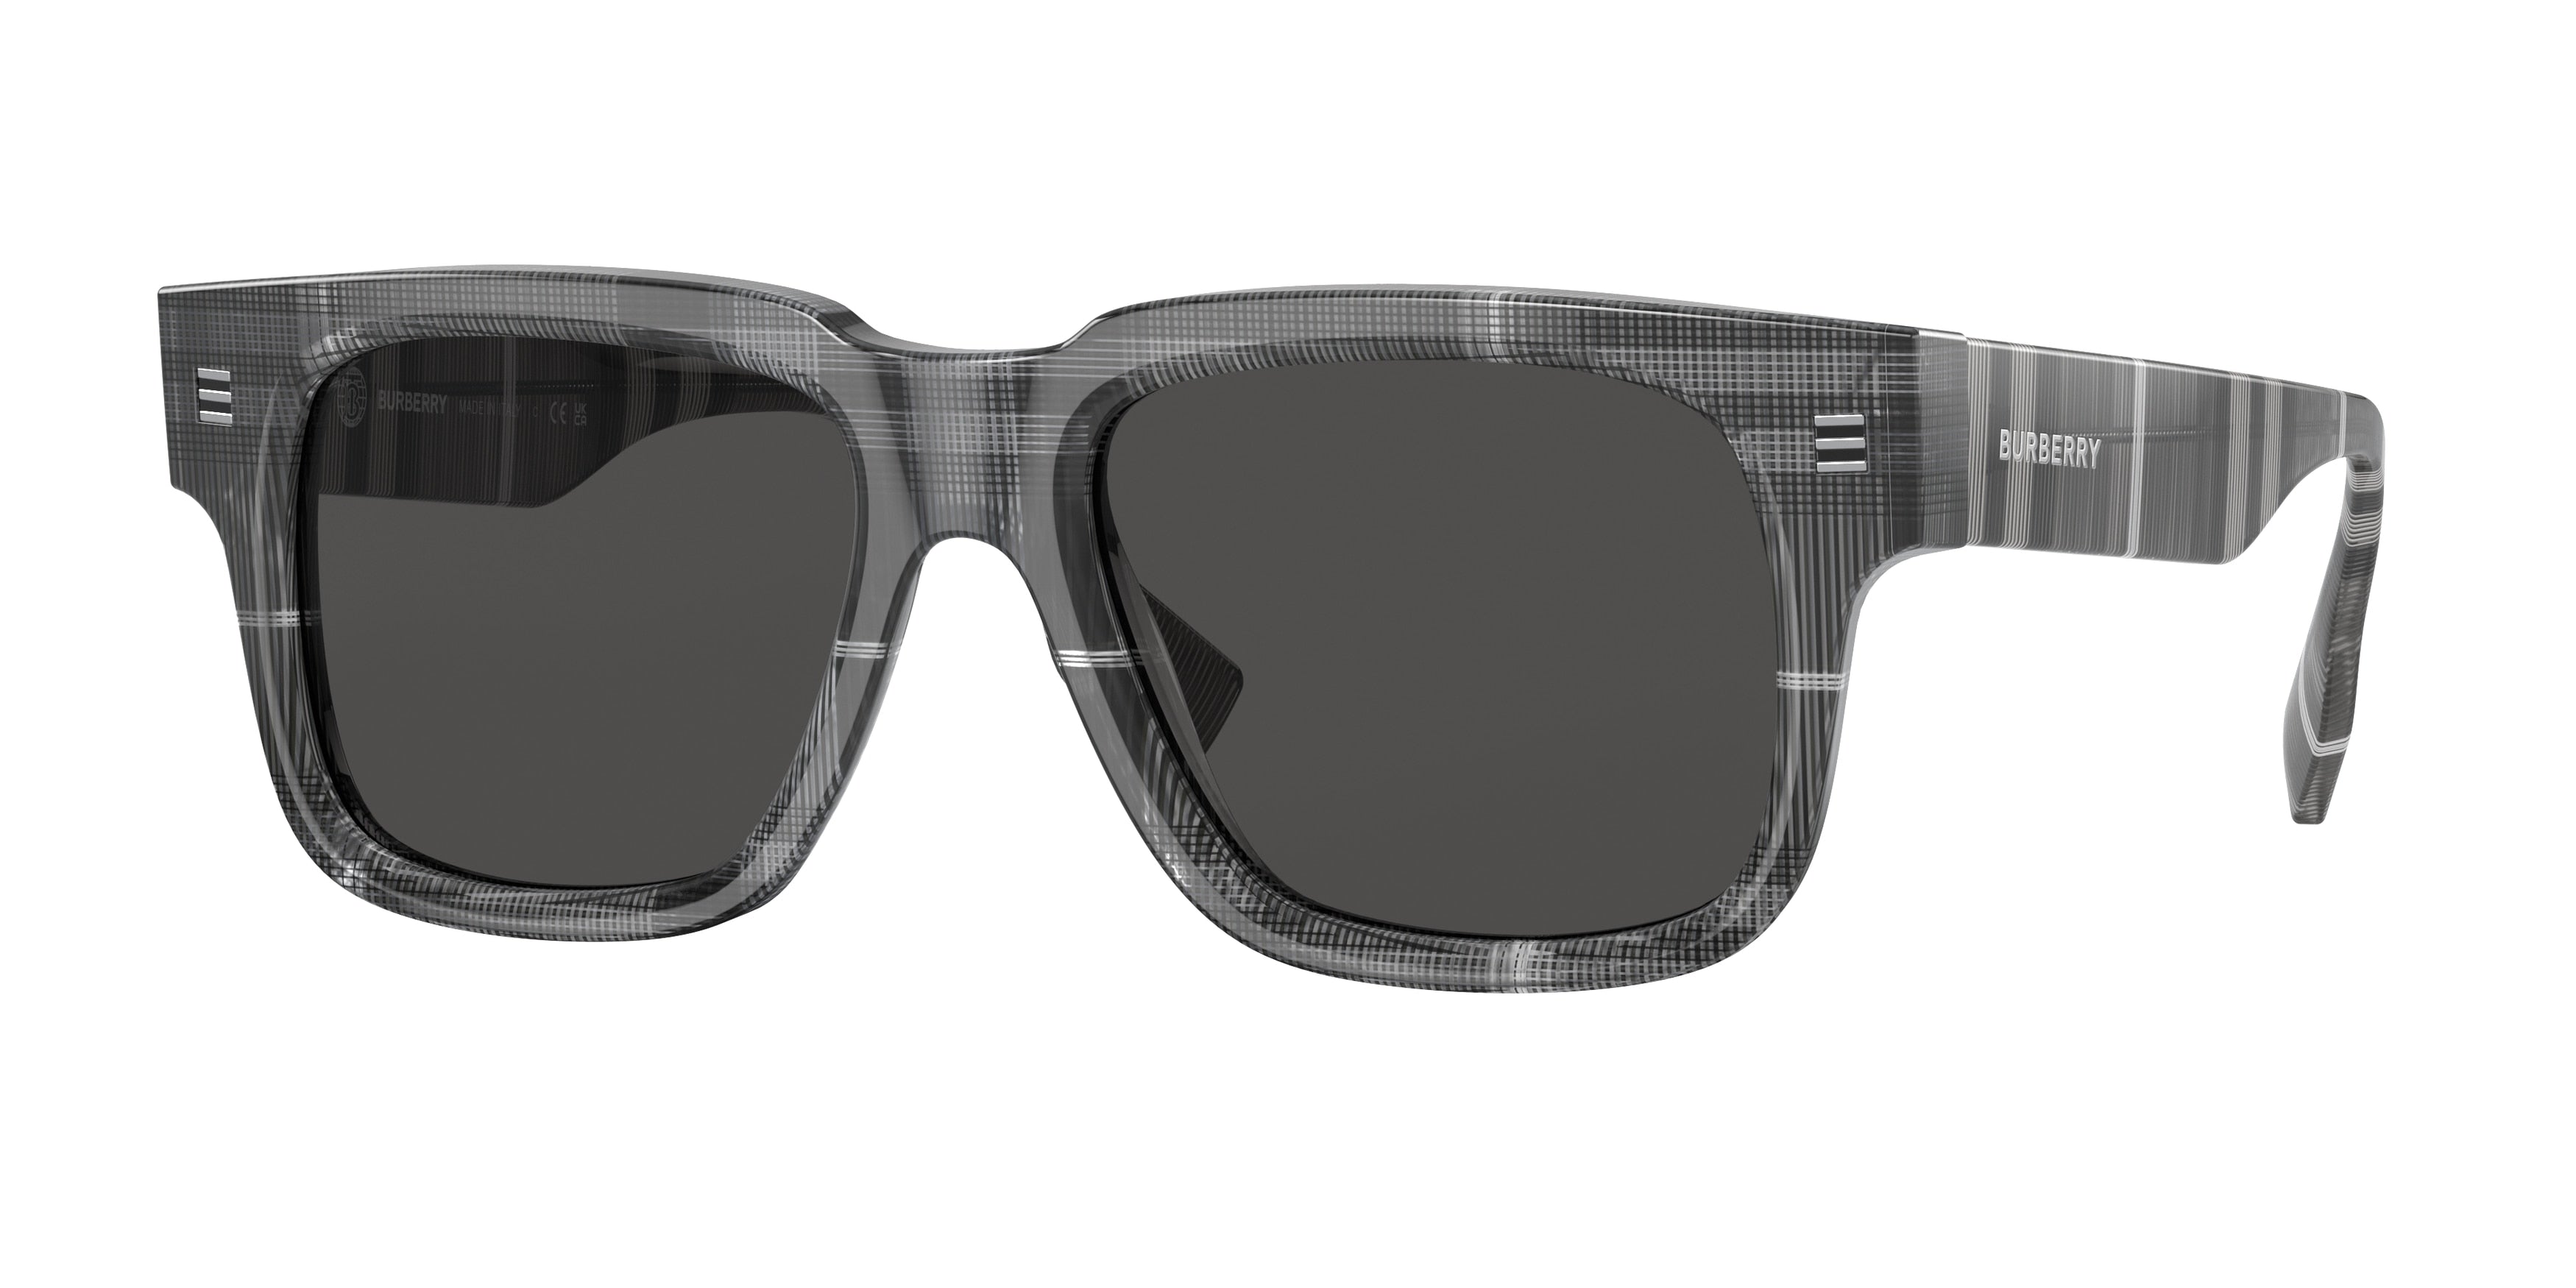 Burberry HAYDEN BE4394 Square Sunglasses  380487-Charcoal Check 54-150-18 - Color Map Grey